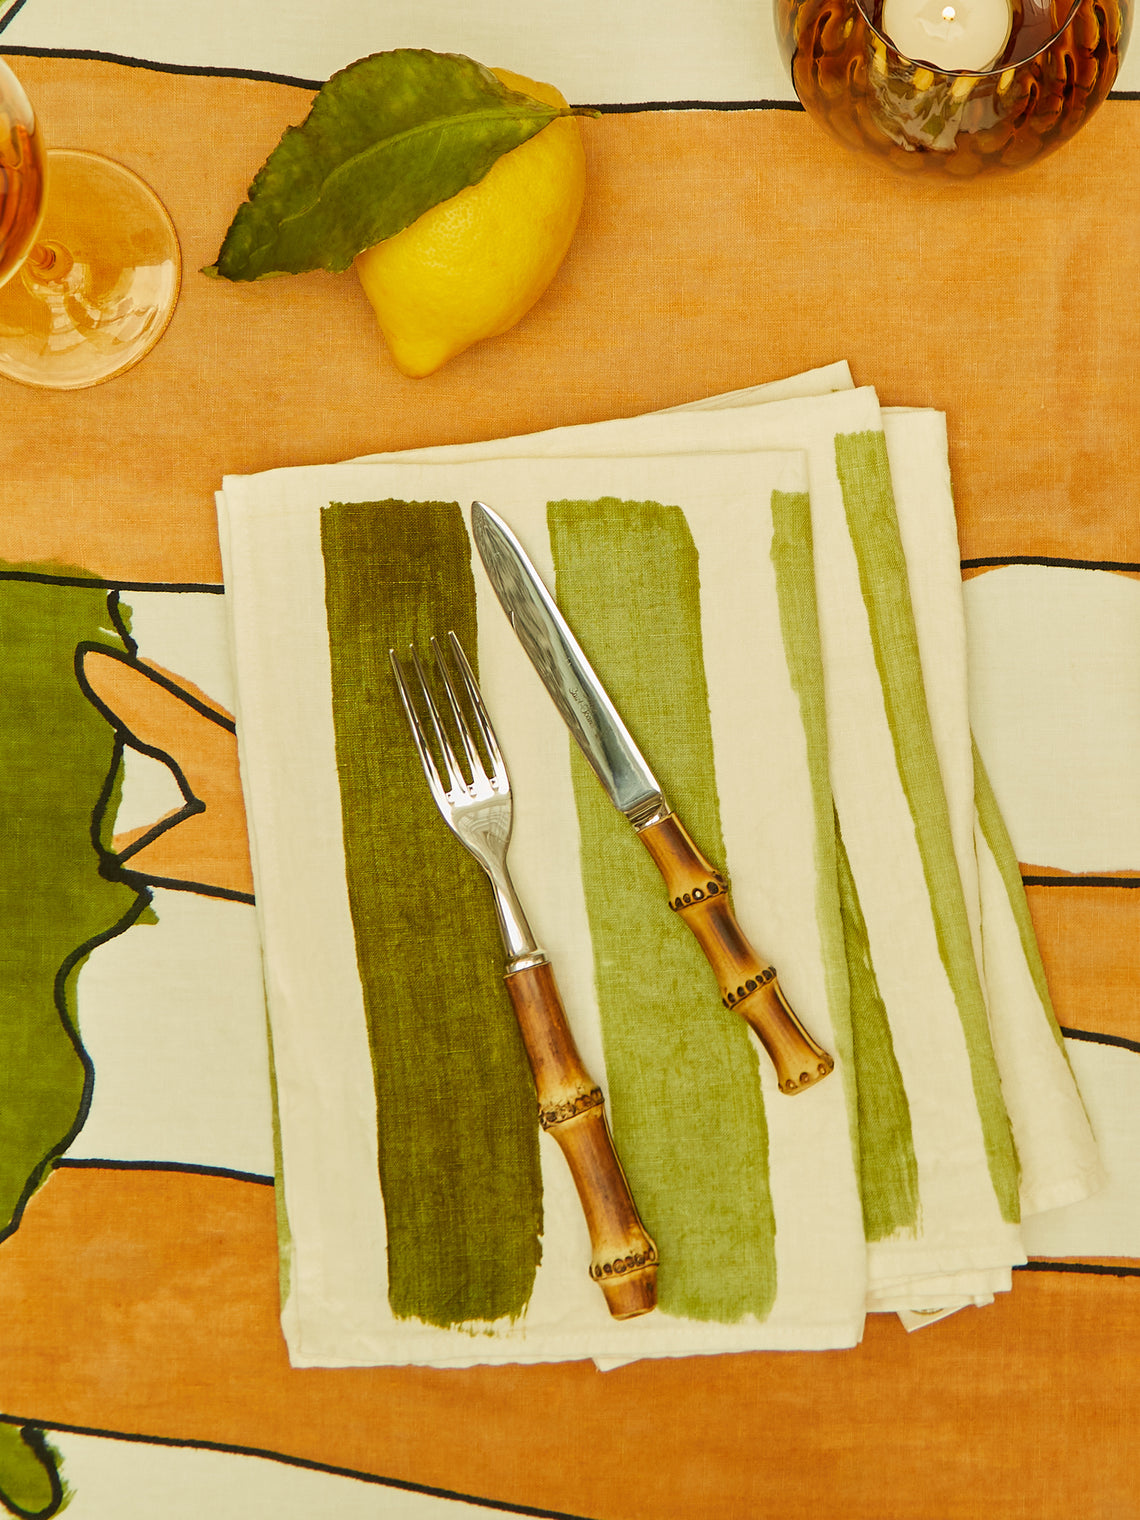 Stamperia Bertozzi - Striped Hand-Painted Linen Napkins (Set of 4) -  - ABASK